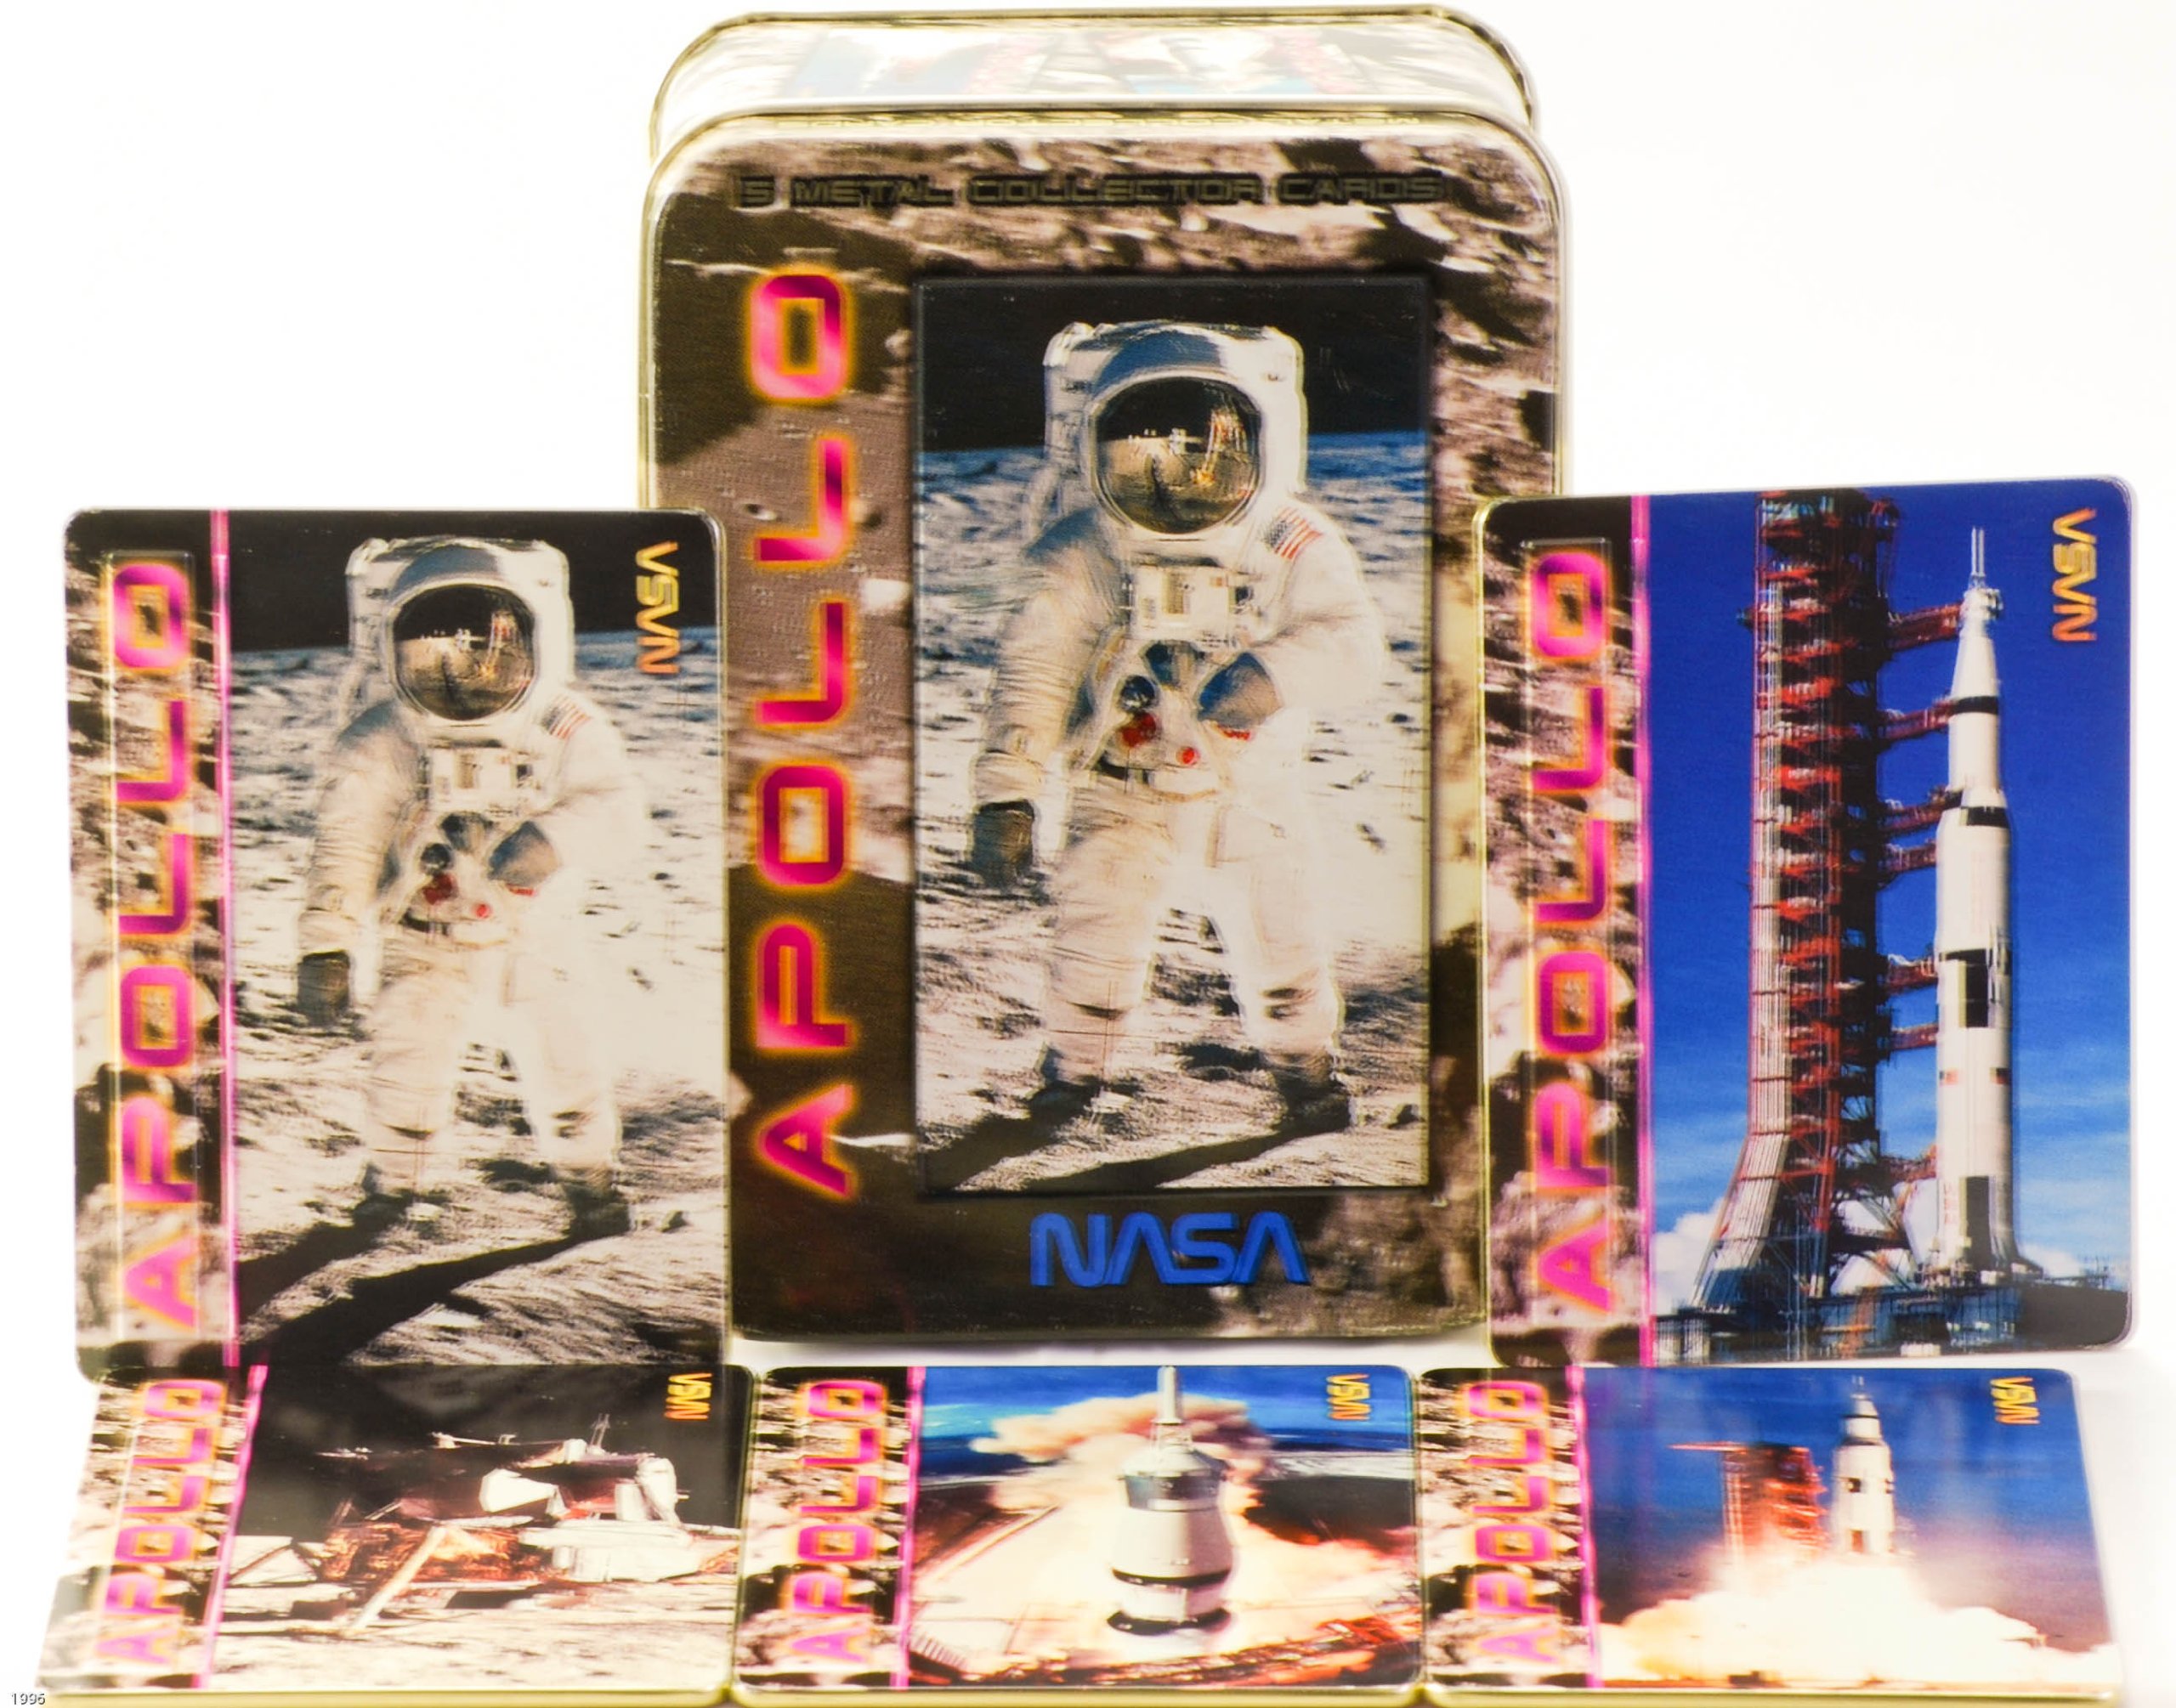 1996 - Metallic Impressions Inc - NASA - Apollo : 5 Metal Collector Cards - In Collectible Tin - Cards Have Beautiful NASA Photos on Front / Back is Mission Info - New - Rare - Out of Production - Collectible